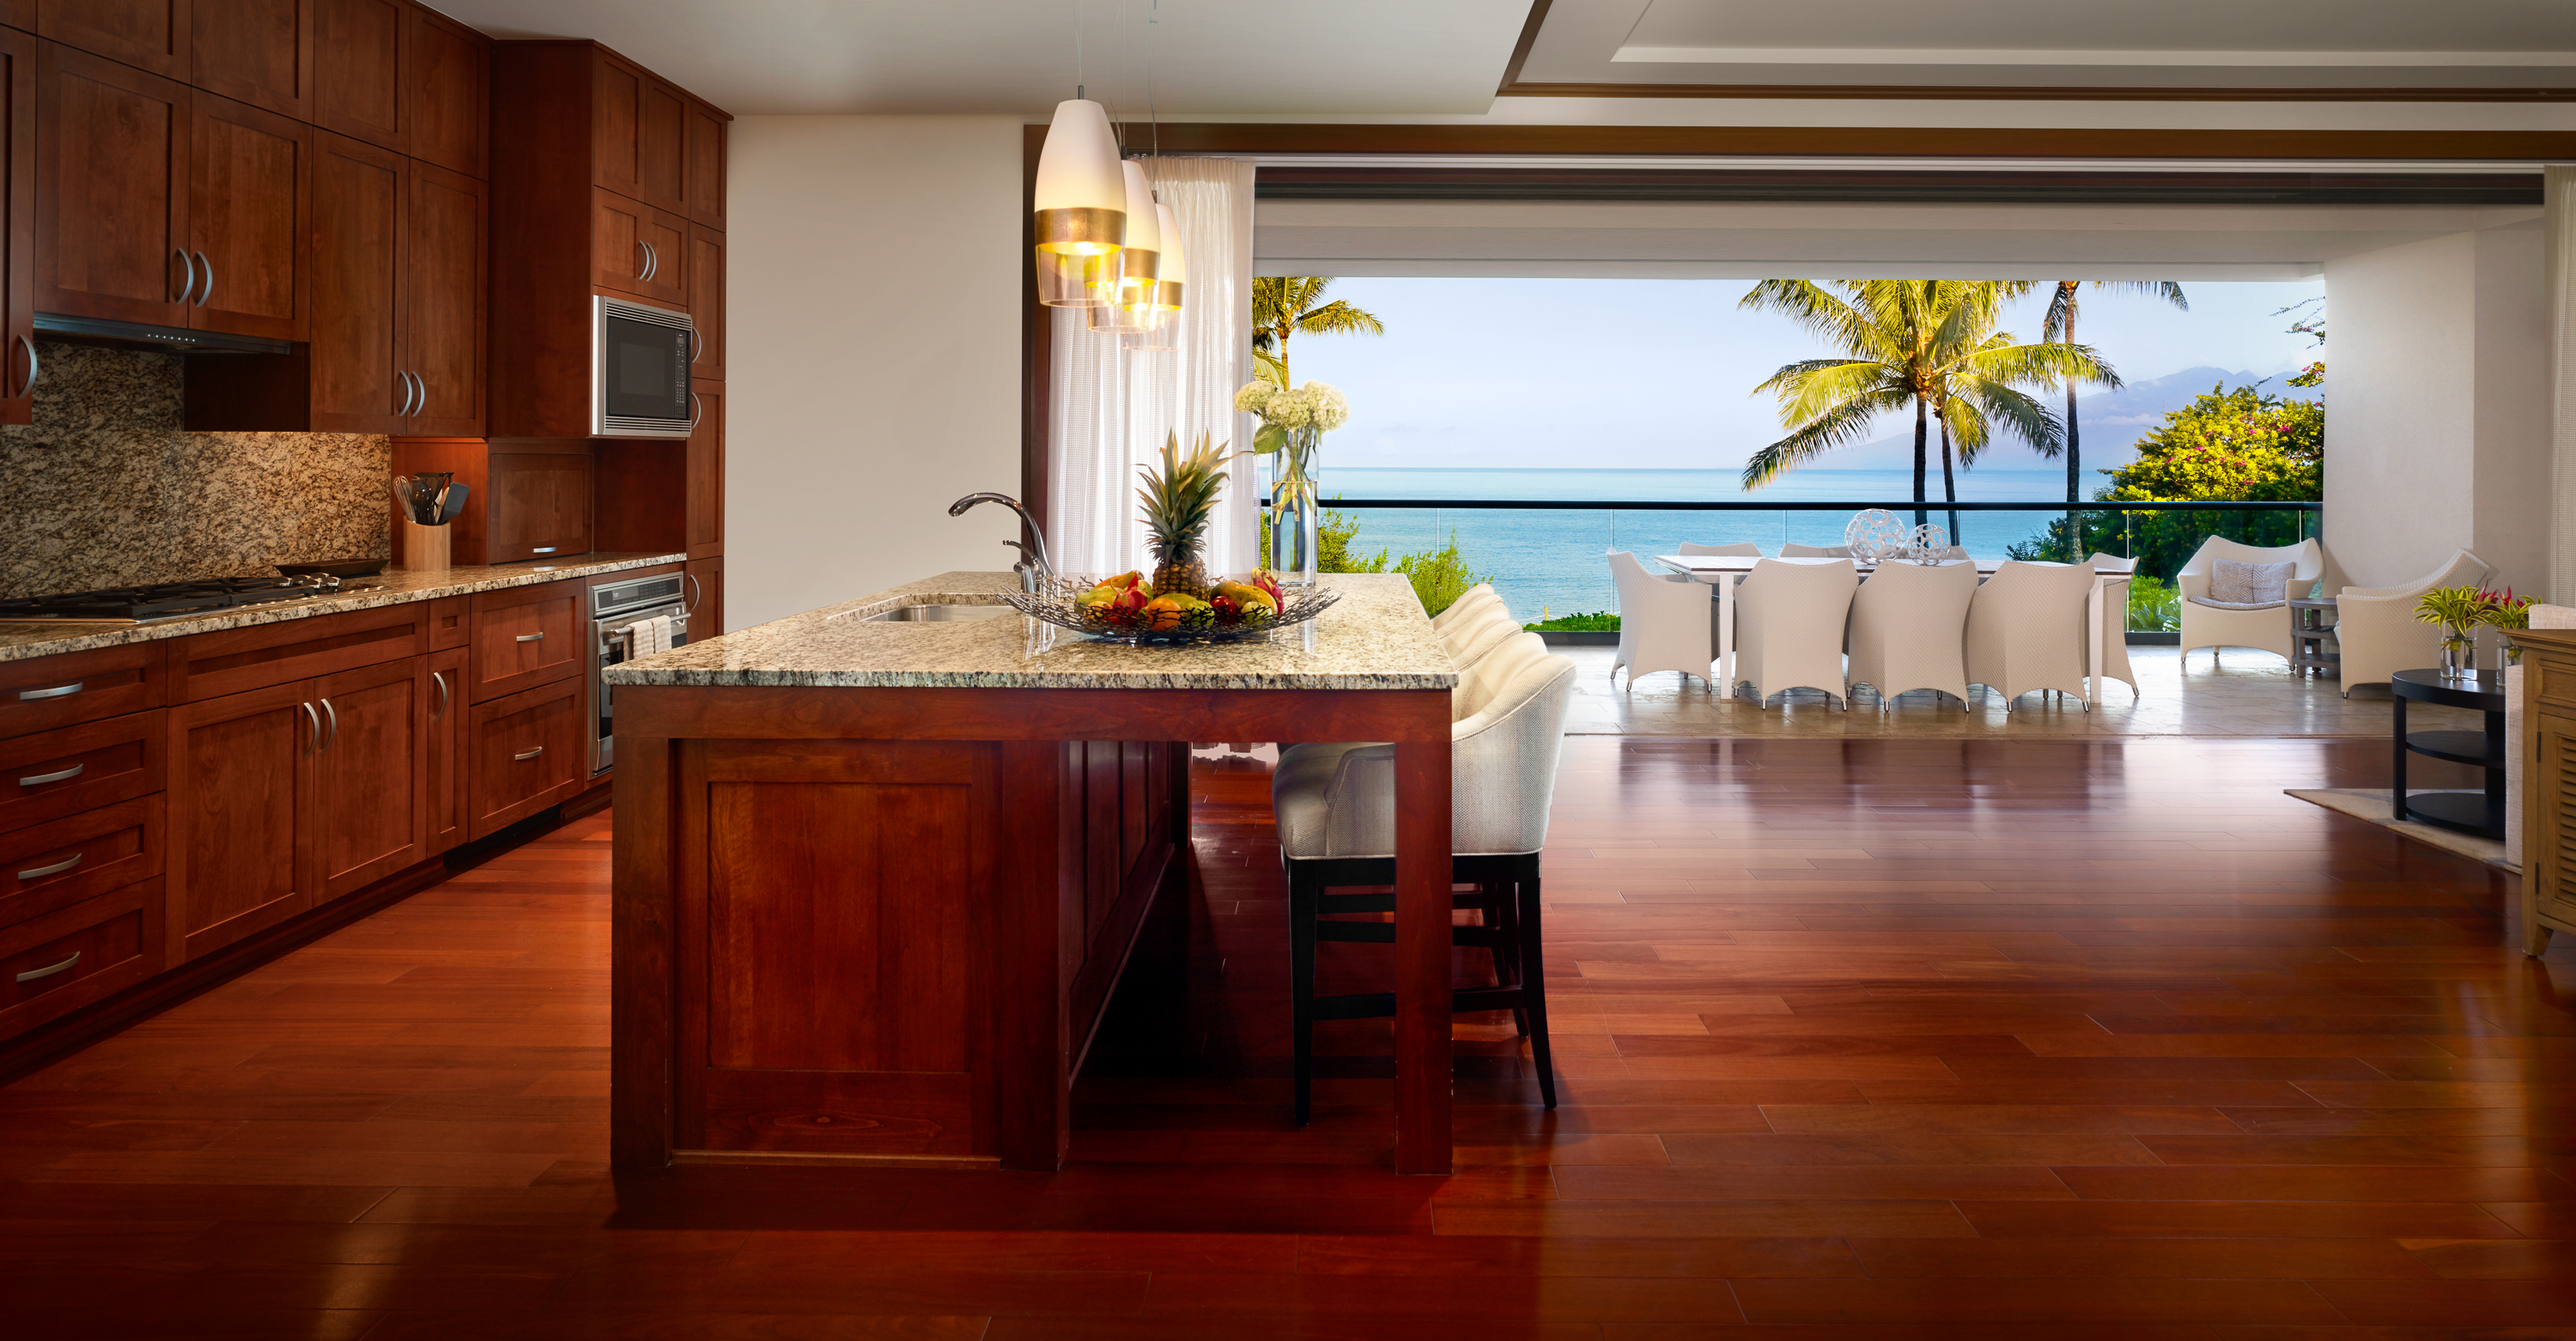 Three or four-Bedroom grand residences with gourmet kitchen and ocean facing views